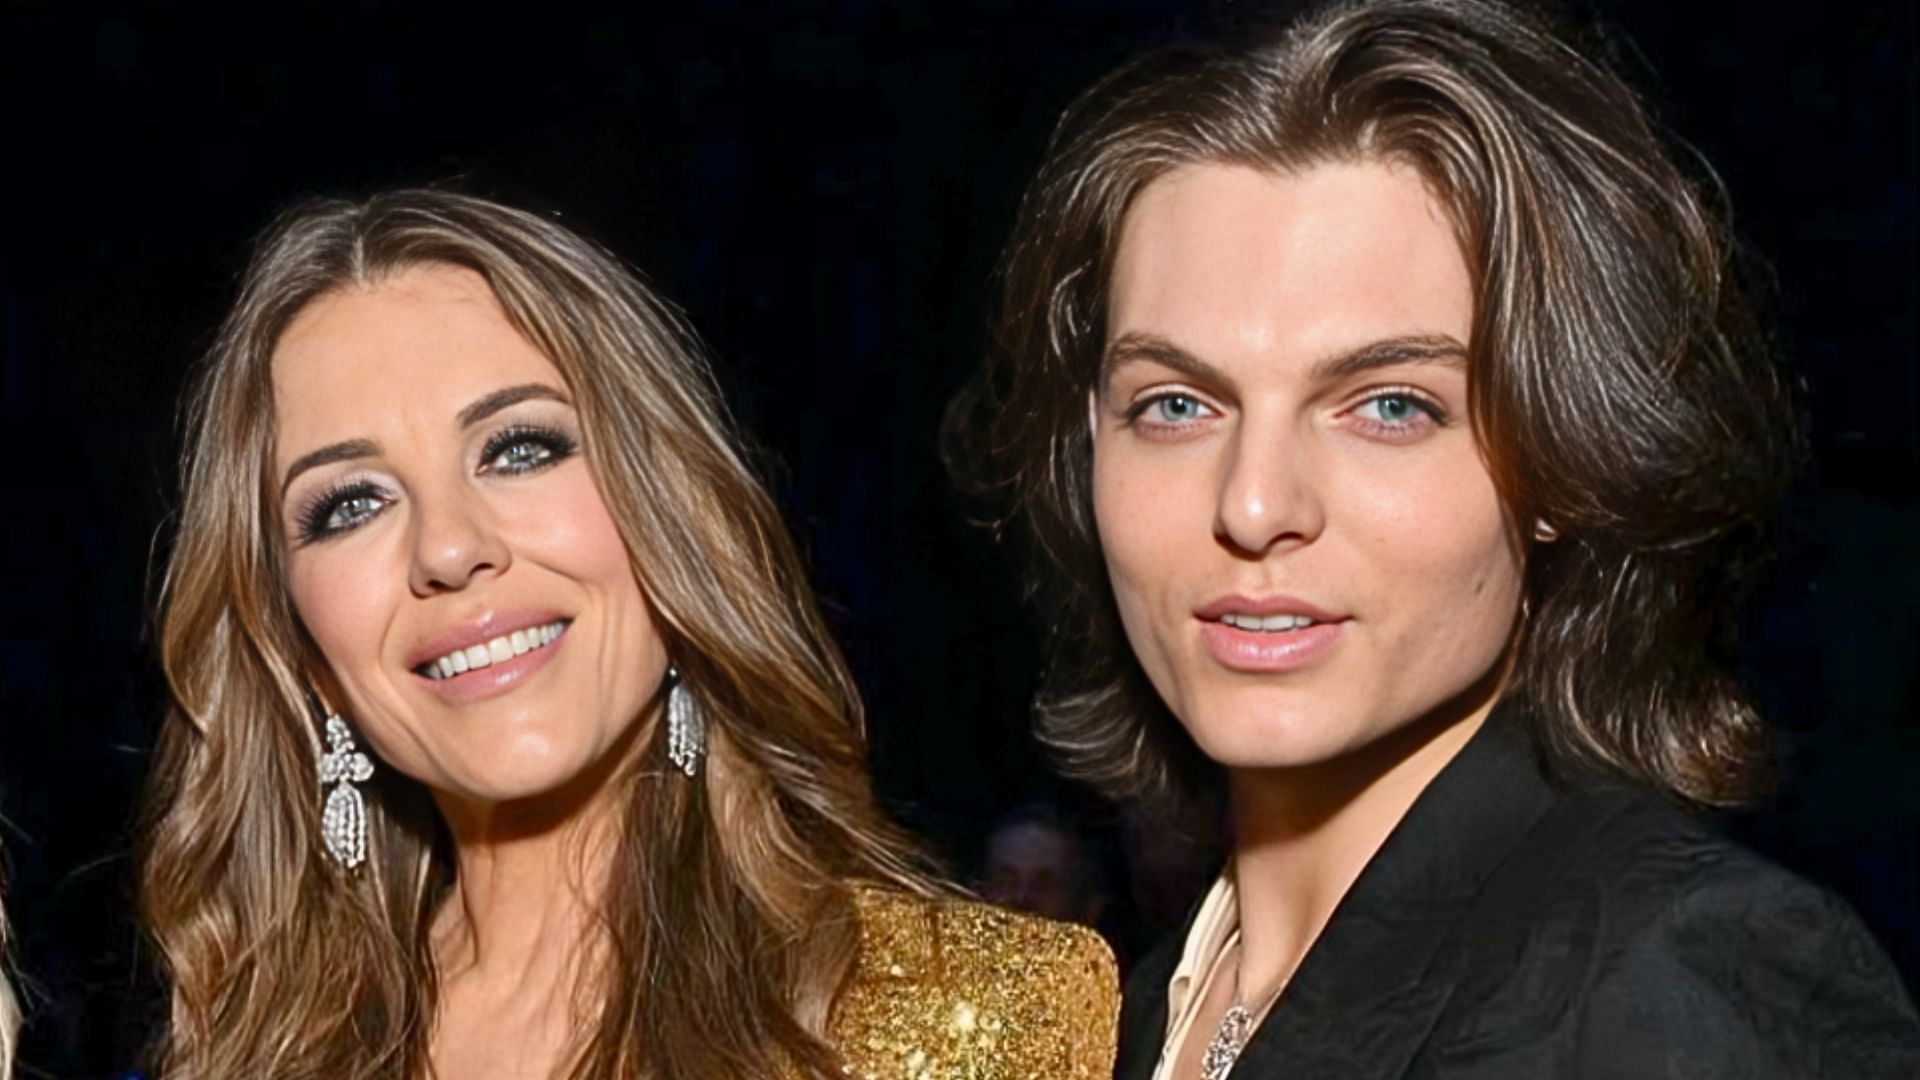 Damian Hurley (R) directs his mother, Elizabeth Hurley, (L) in the film Strictly Confidential (Image via Instagram/@damianhurley1)